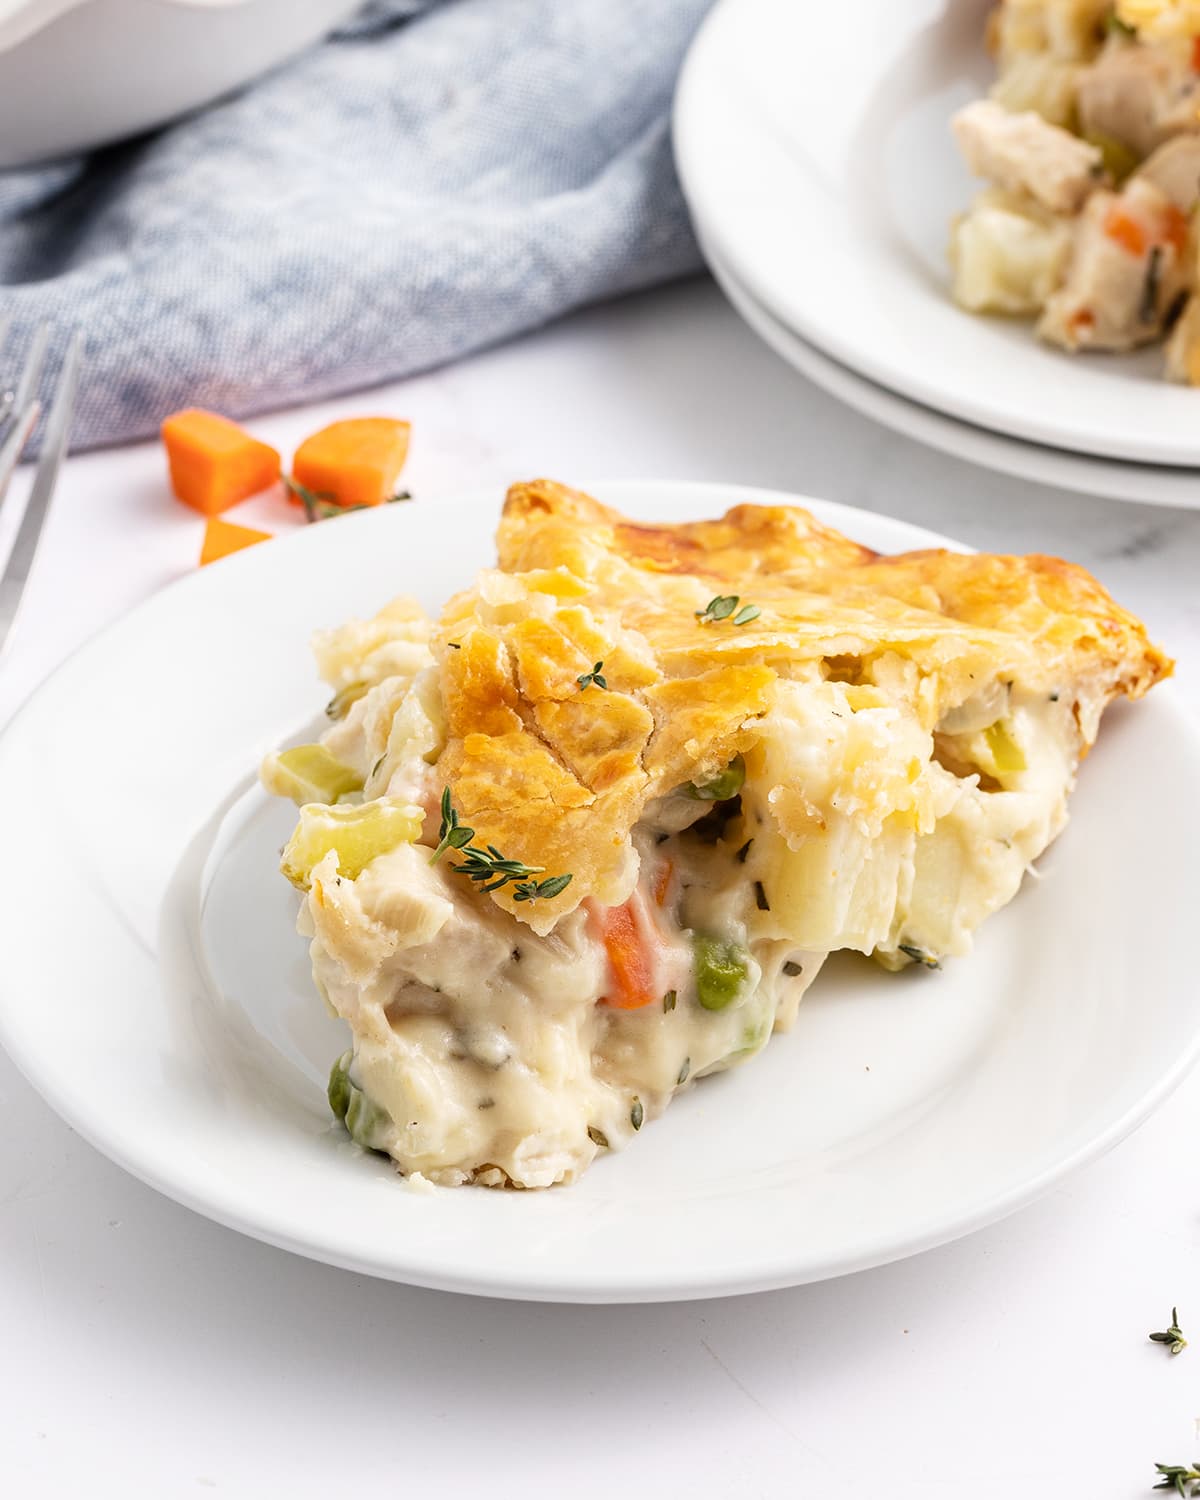 A slice of chicken pot pie on a plate.